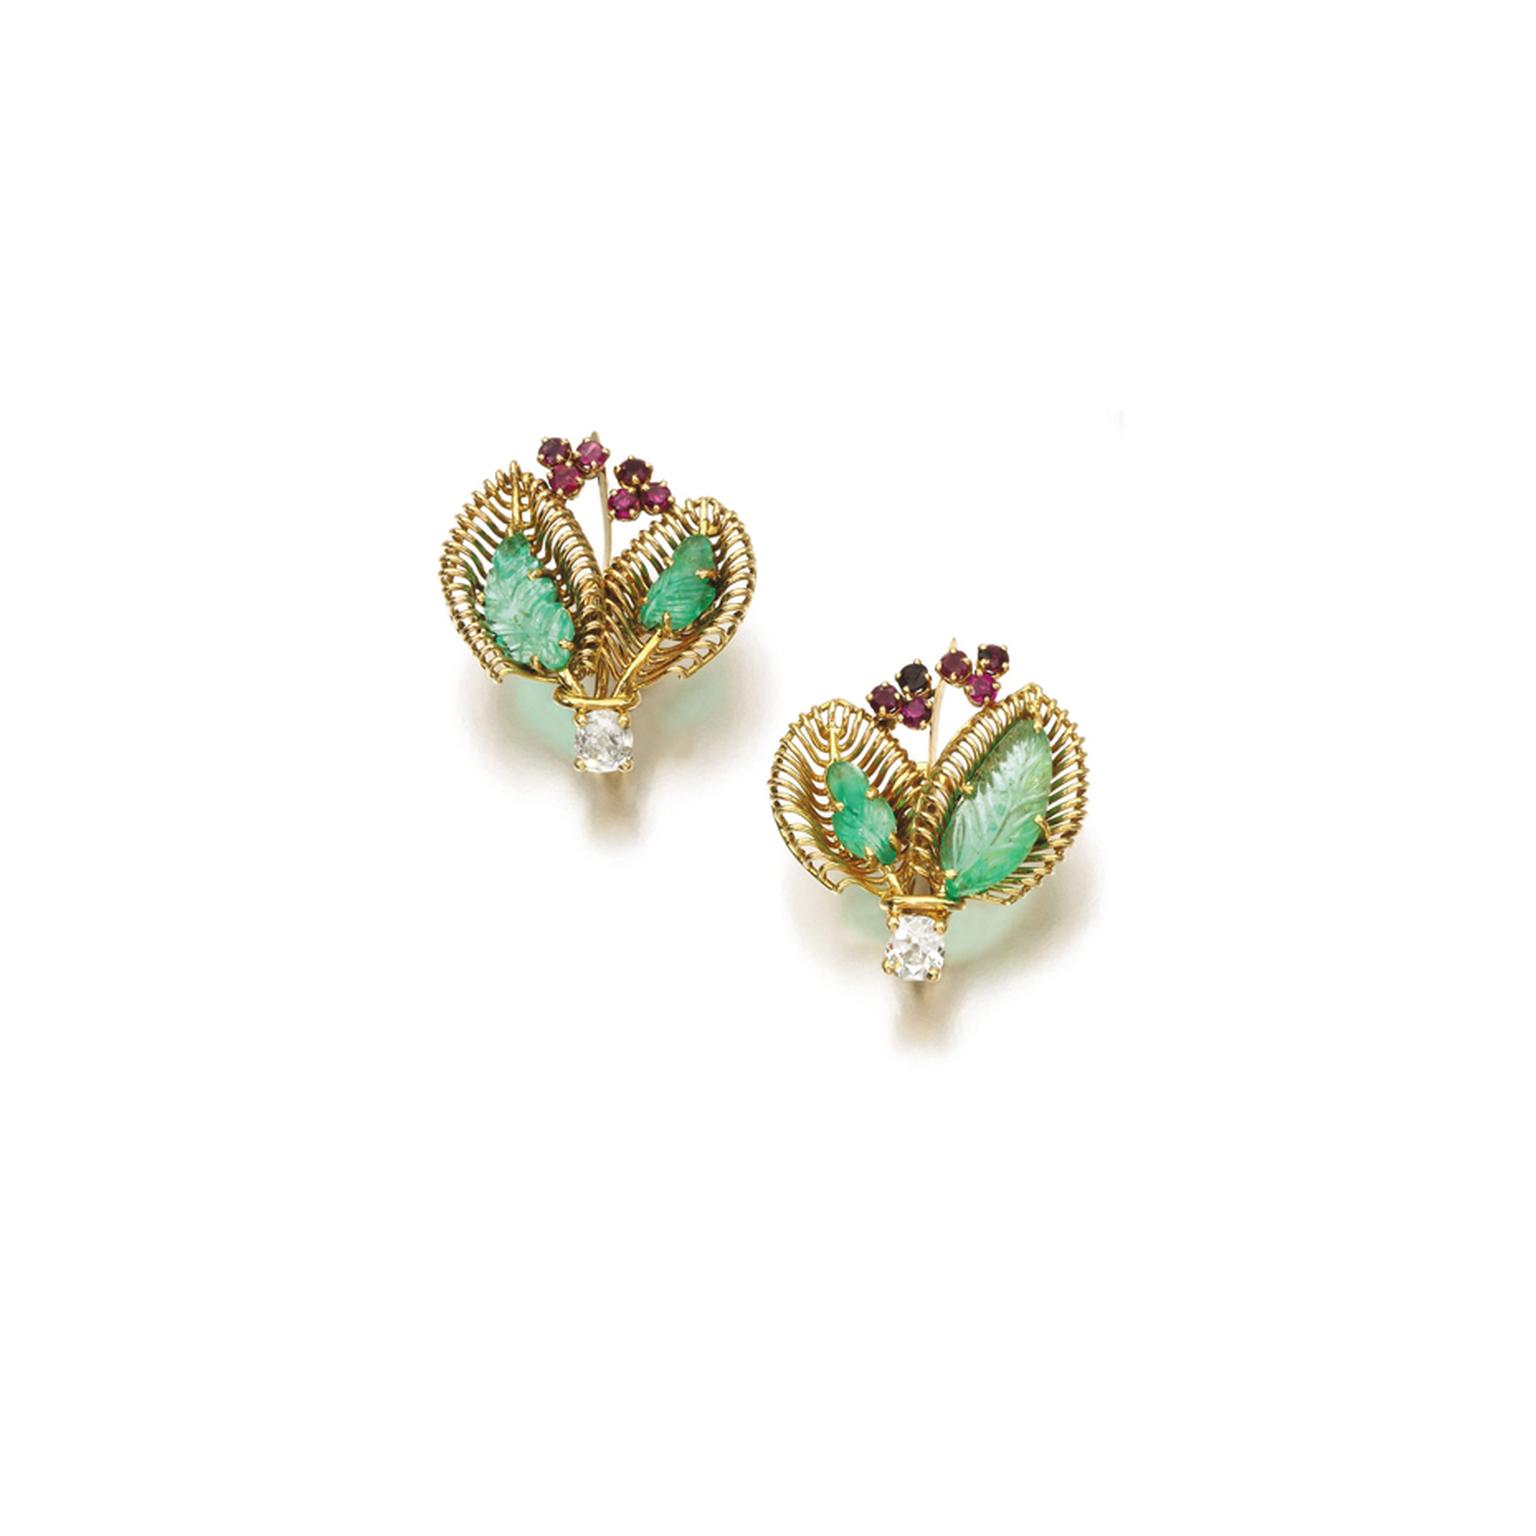 Lot 103, from the Daisy Fellowes collection, a pair of 1950s ruby, emerald and diamond earrings featuring a stylised bouquet design, each set with two foliate carved emeralds, circular-cut rubies and diamonds (estimate: £3,000-5,000; unsold)